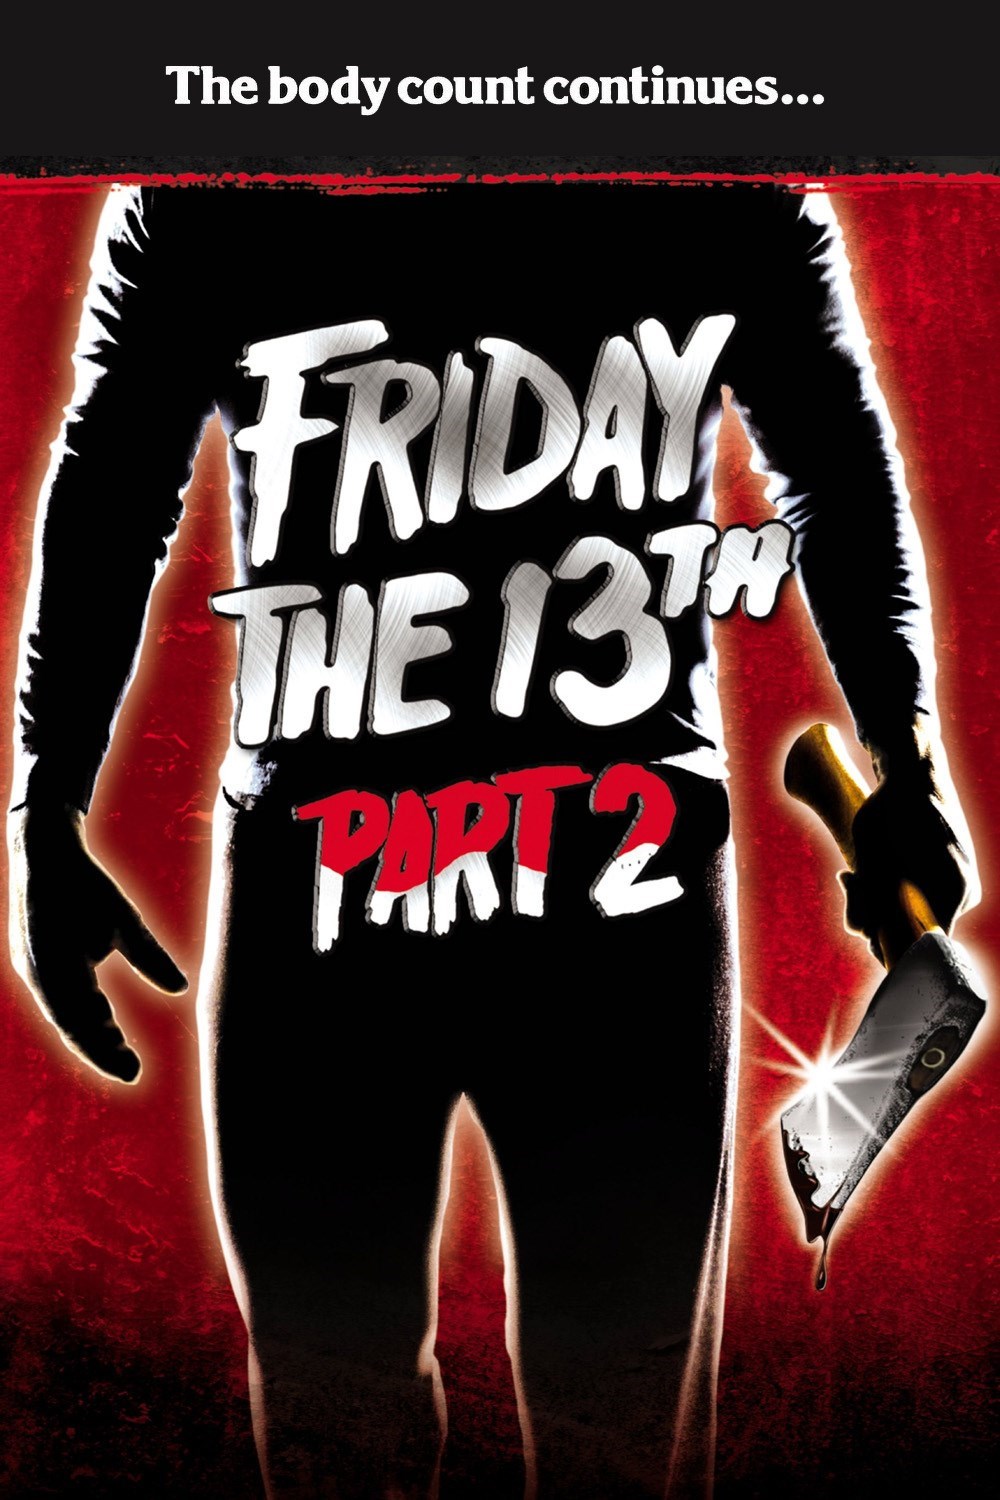 Friday The 13th Part 2 HD wallpapers, Desktop wallpaper - most viewed